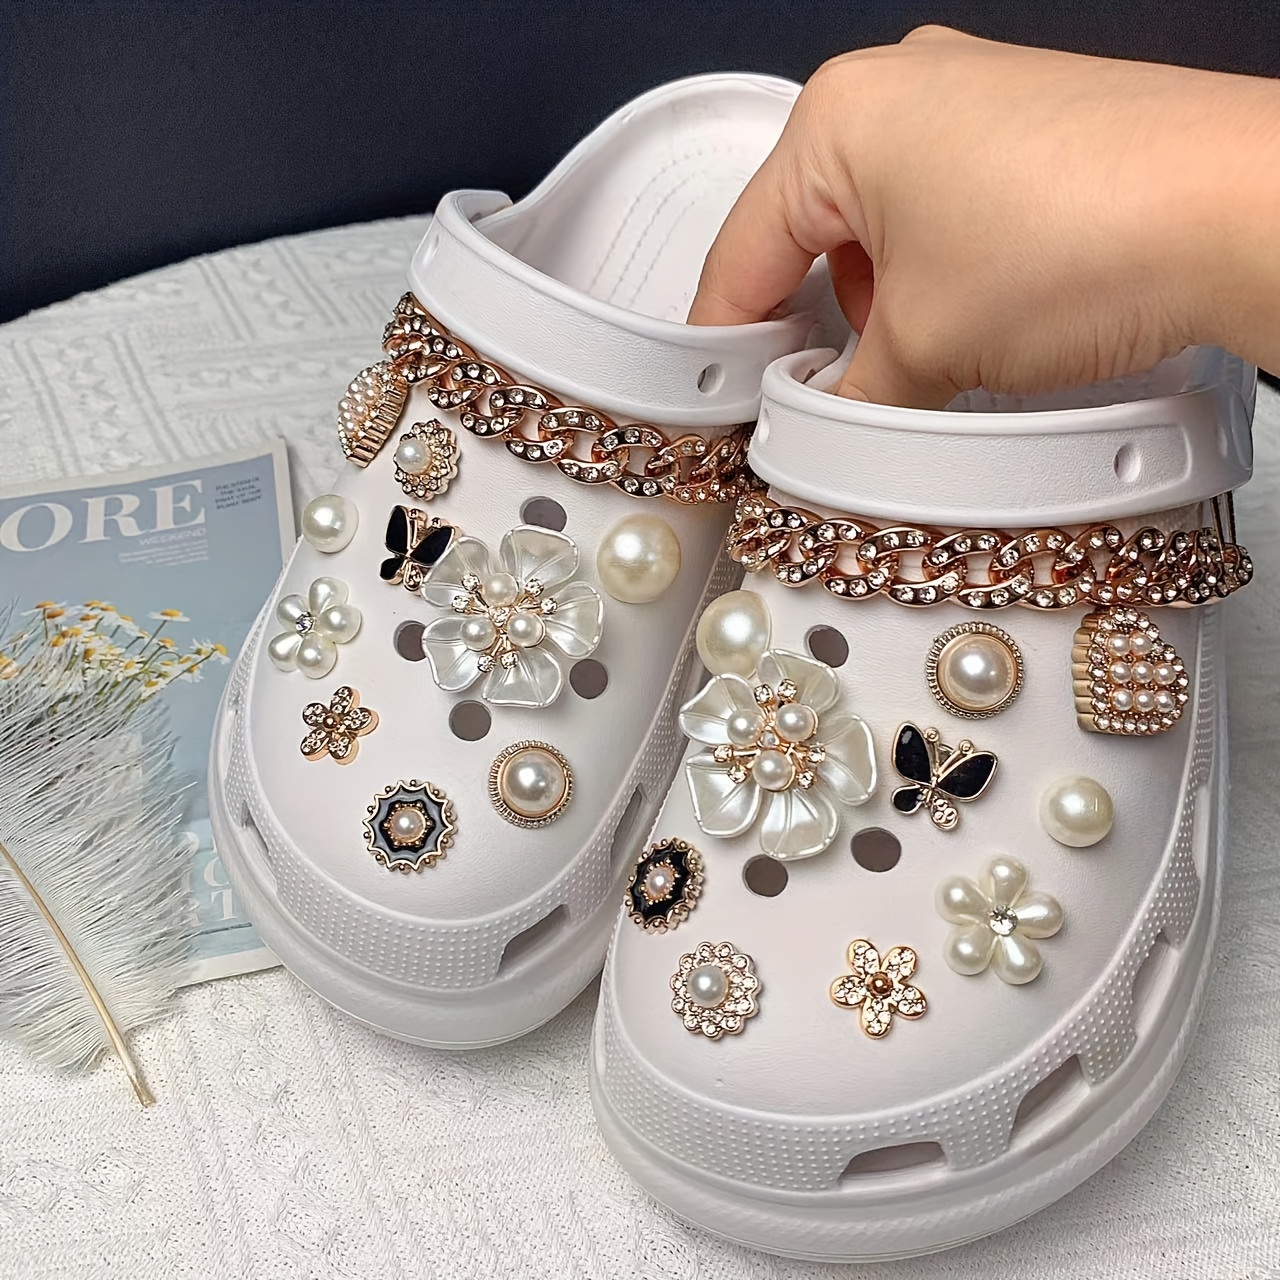 22Pcs/Set Bling Shoe Charms Decoration for Croc Fit for Kids and Women Party Birthday Gifts Jewelry, Jewels Accessories Clog Sandal Shoe